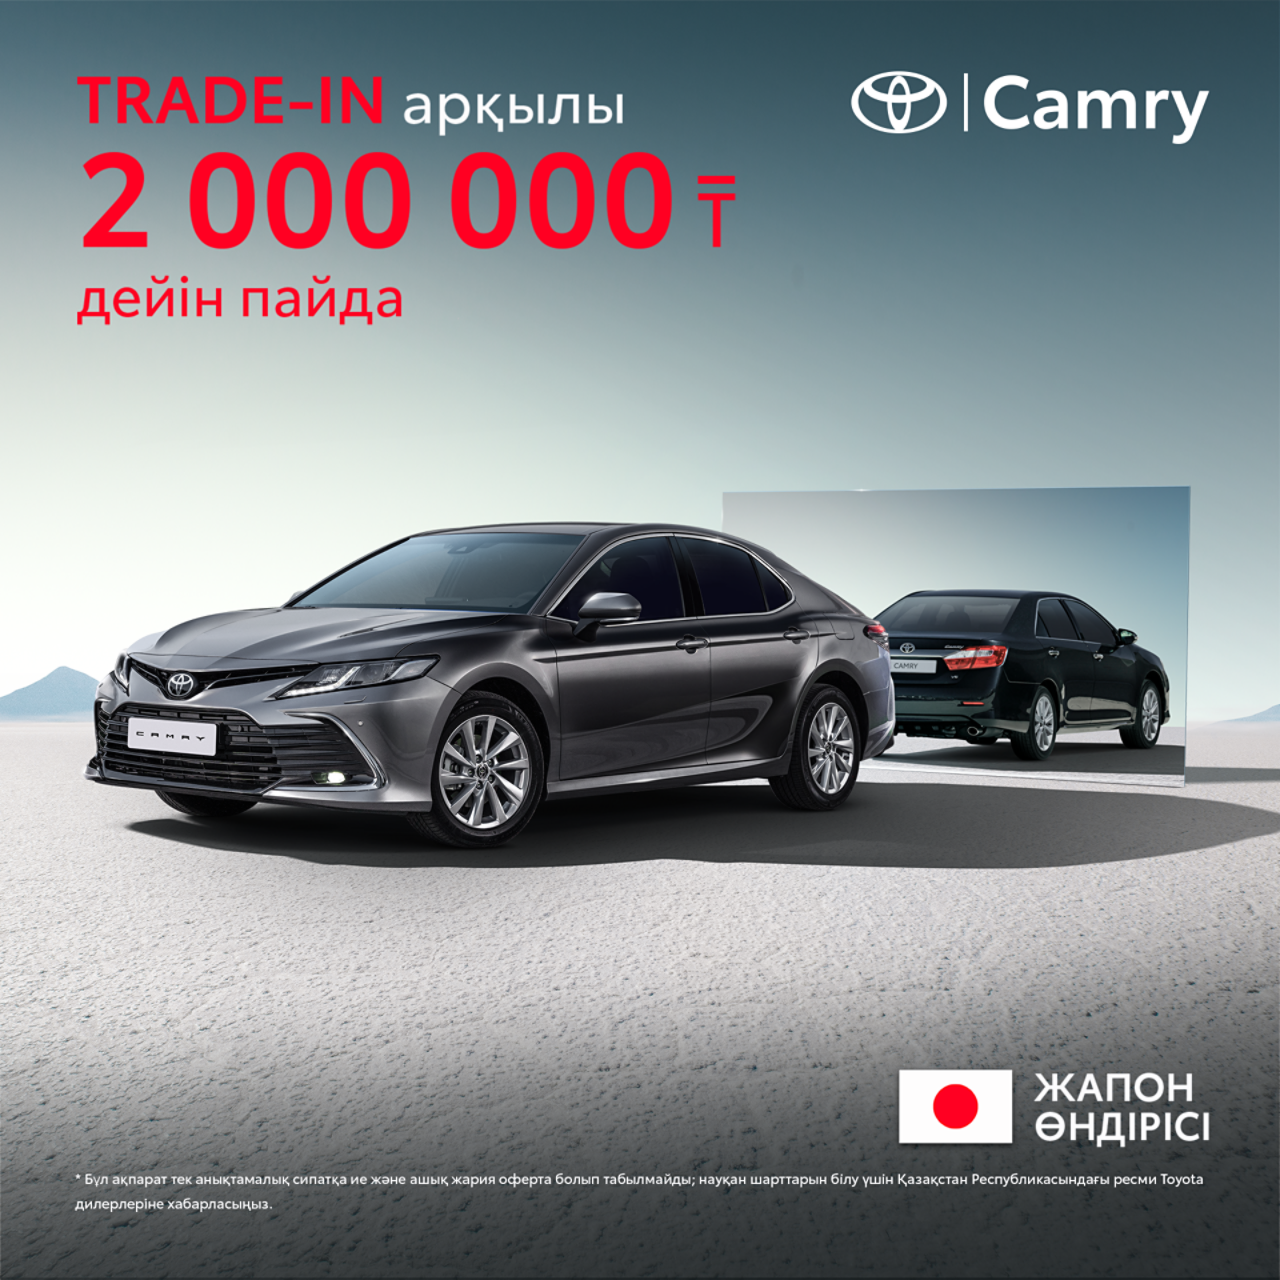 Toyota Camry Trade-in Offer